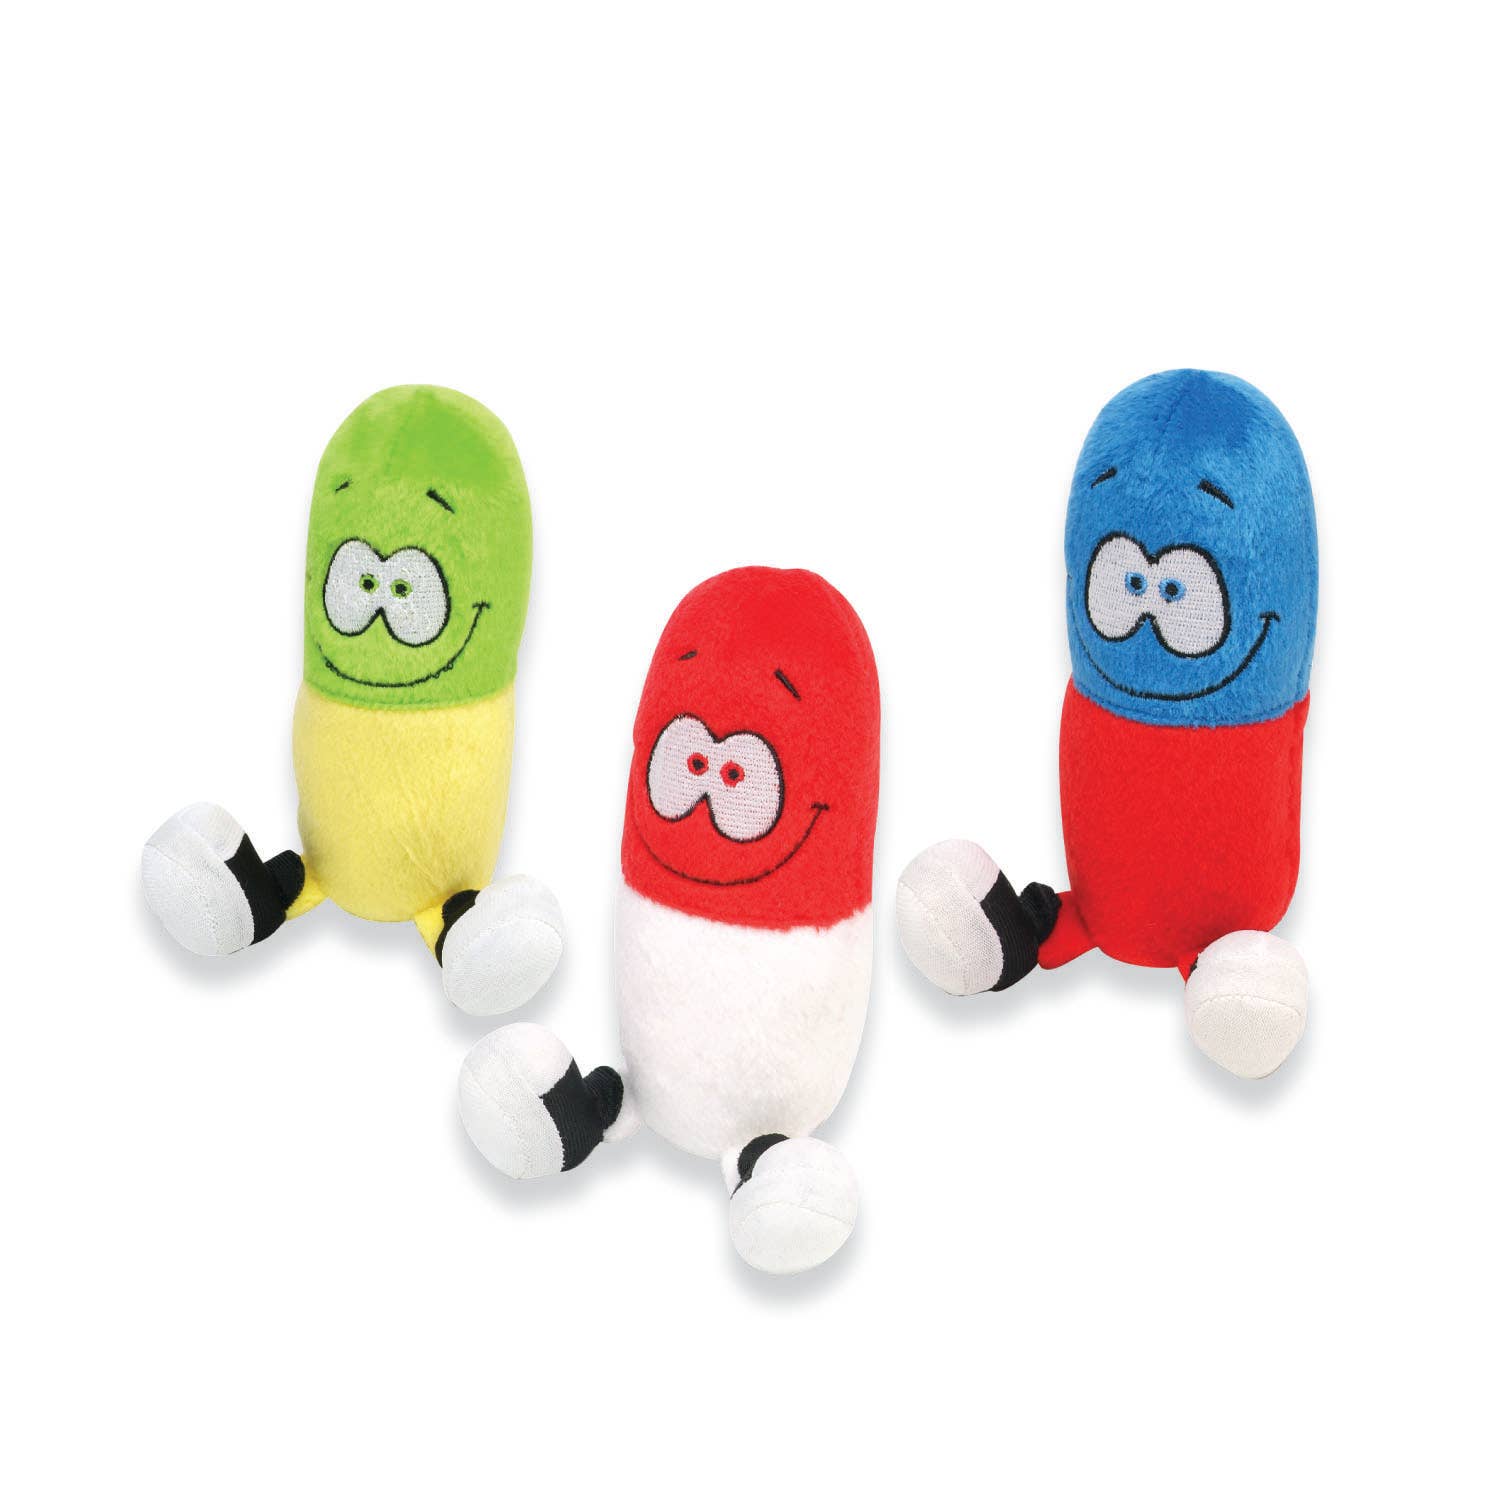 Plush Happy Pills that giggle and laugh. Great Get Well Gift or to cheer up someone.